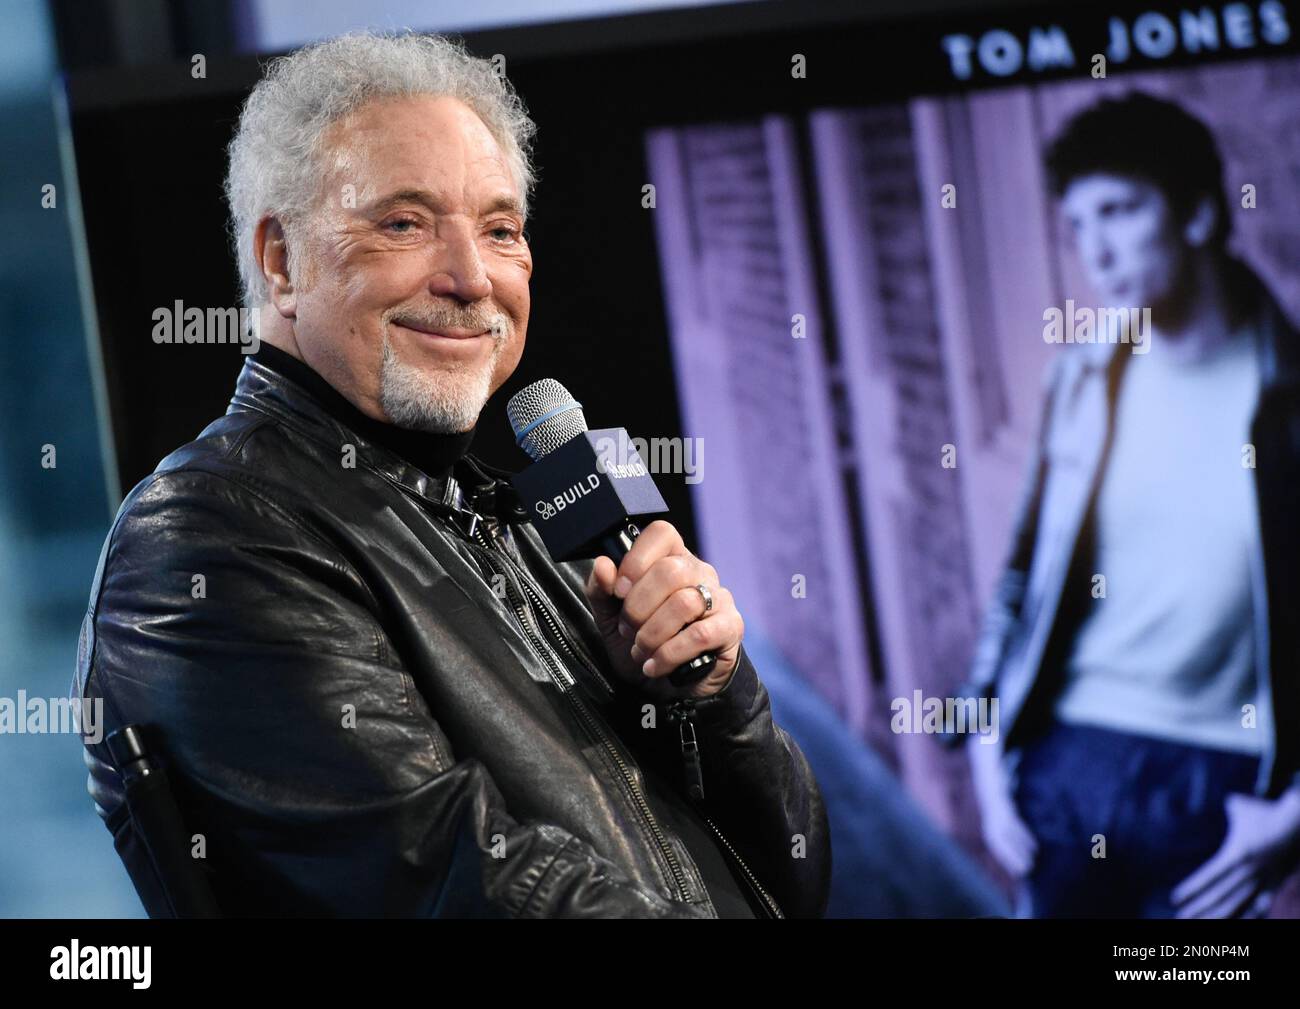 Singer Tom Jones participates in AOL's BUILD Speaker Series to discuss his  new album, "Long Lost Suitcase", at AOL Studios on Wednesday, Dec. 16,  2015, in New York. (Photo by Evan Agostini/Invision/AP